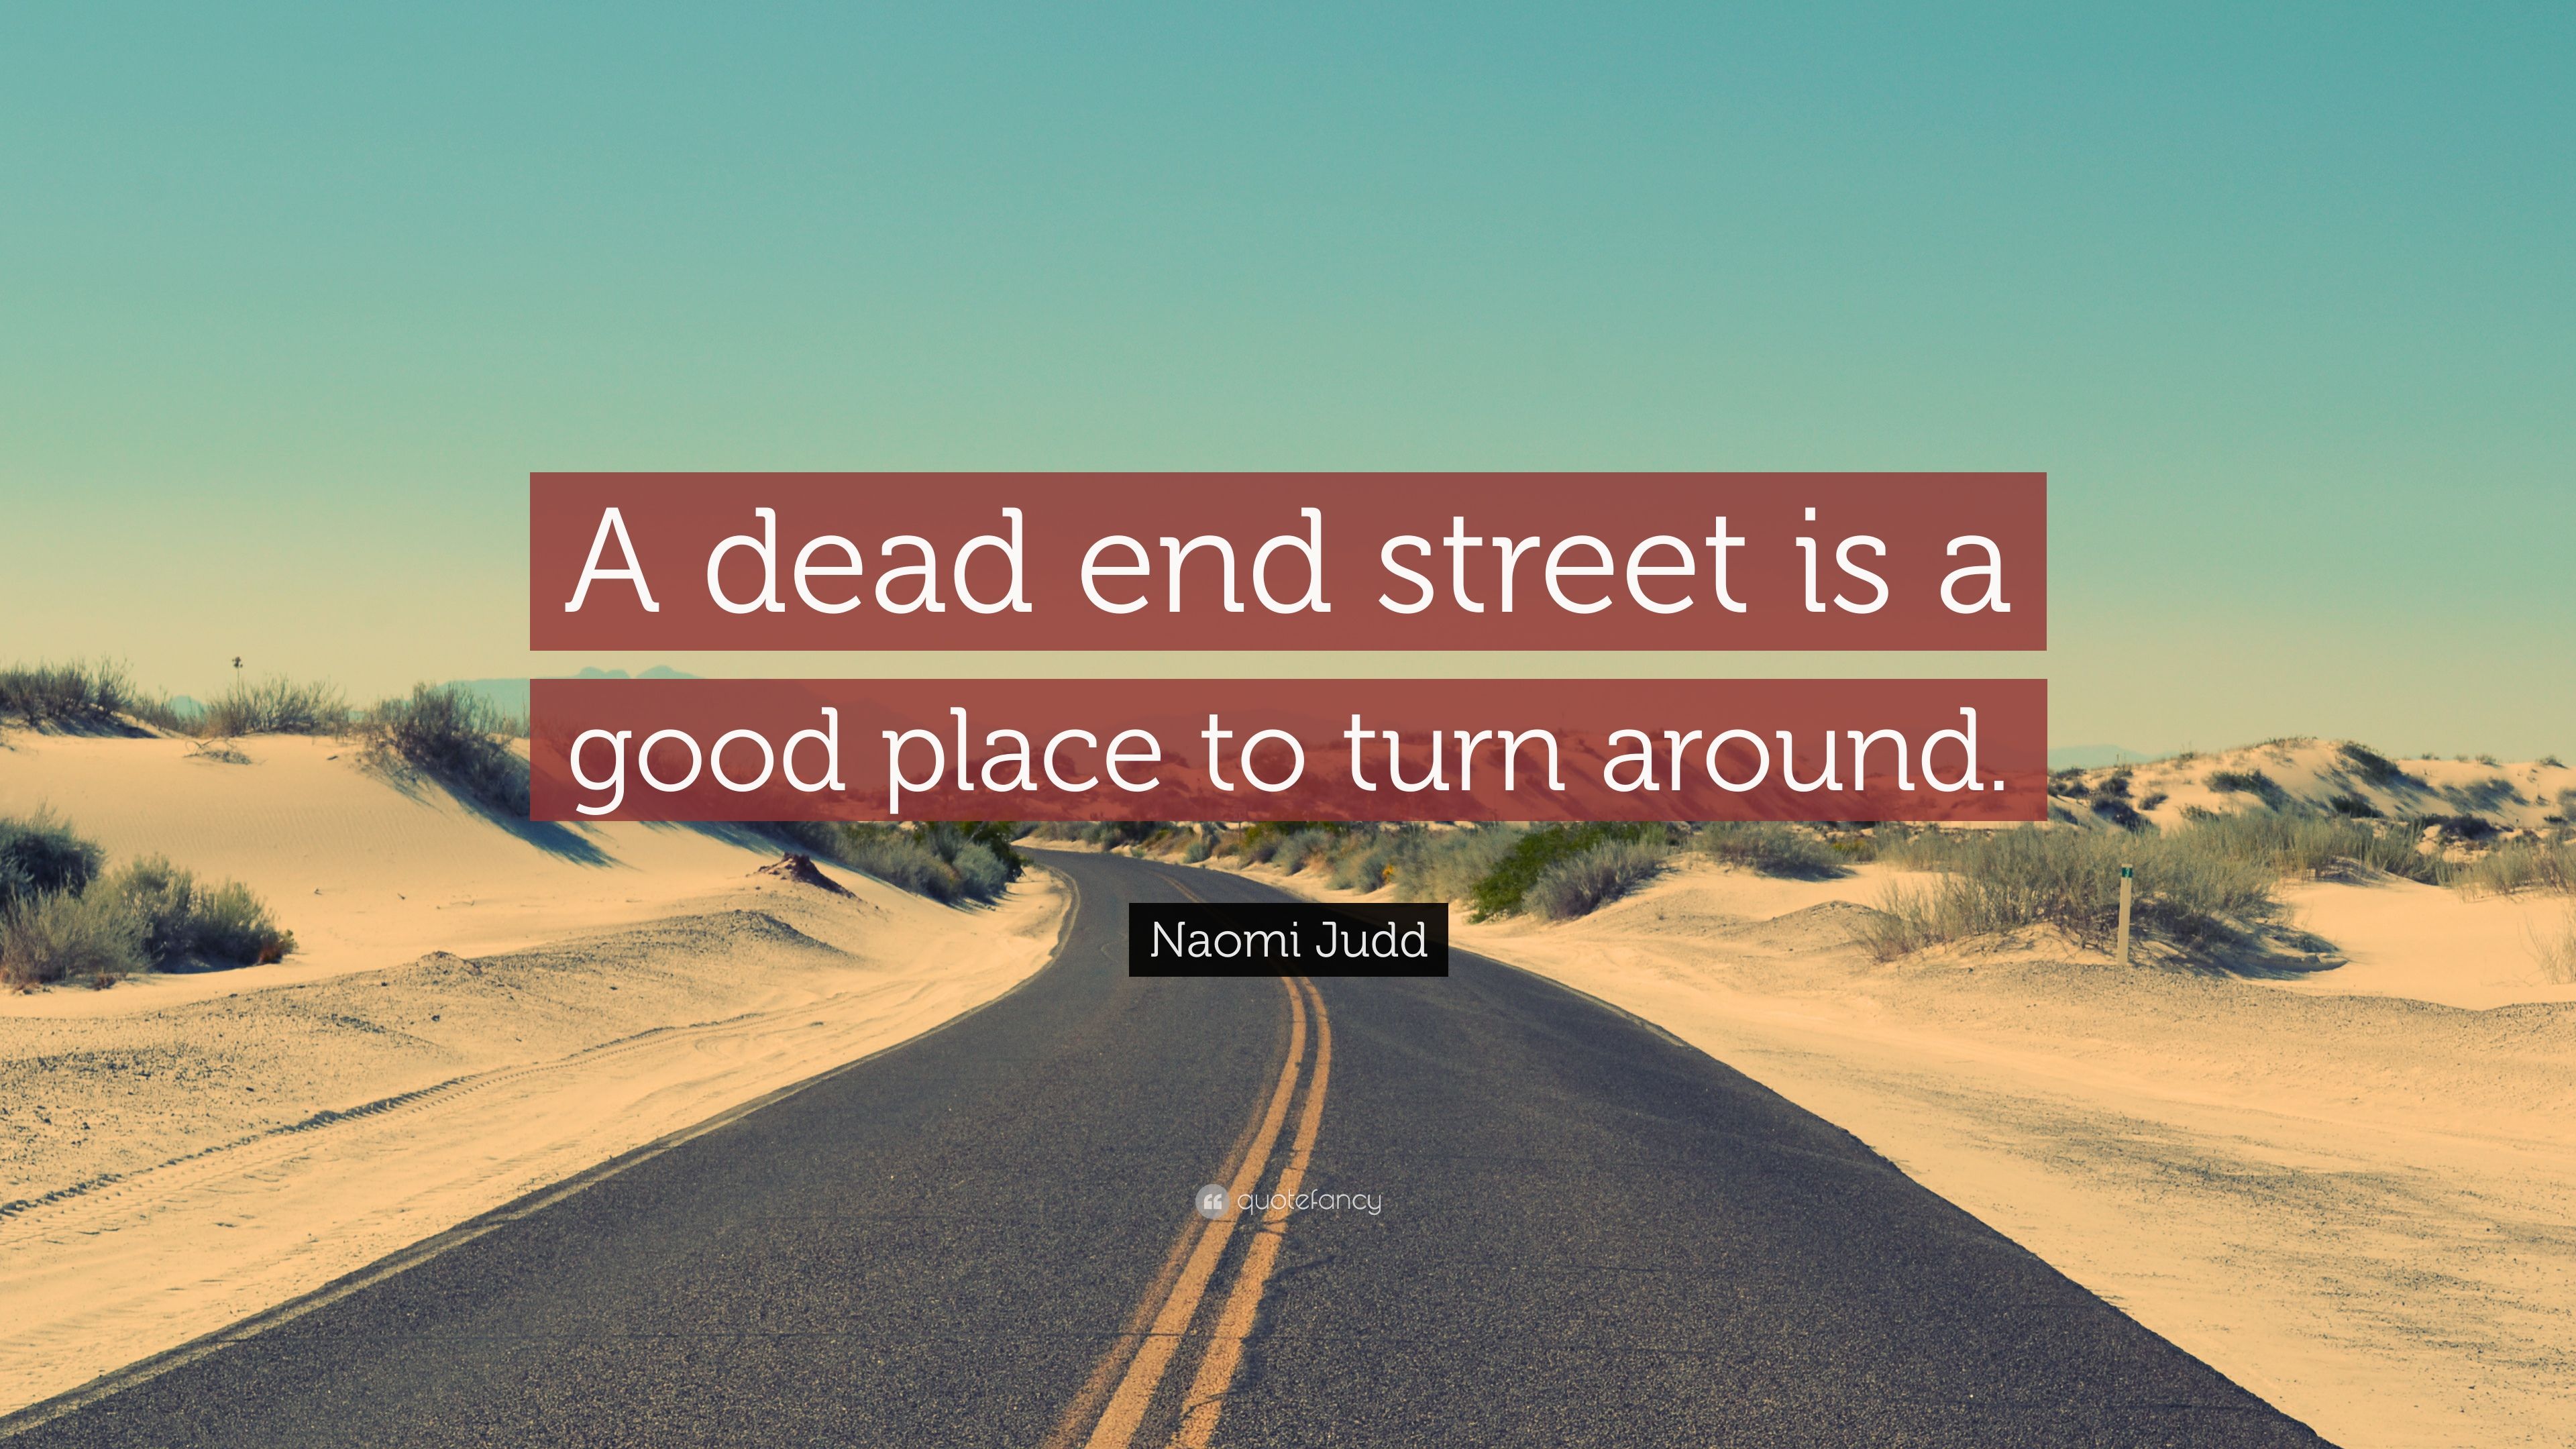 Naomi Judd Quote: “A dead end street is a good place to turn around.” (7 wallpaper)